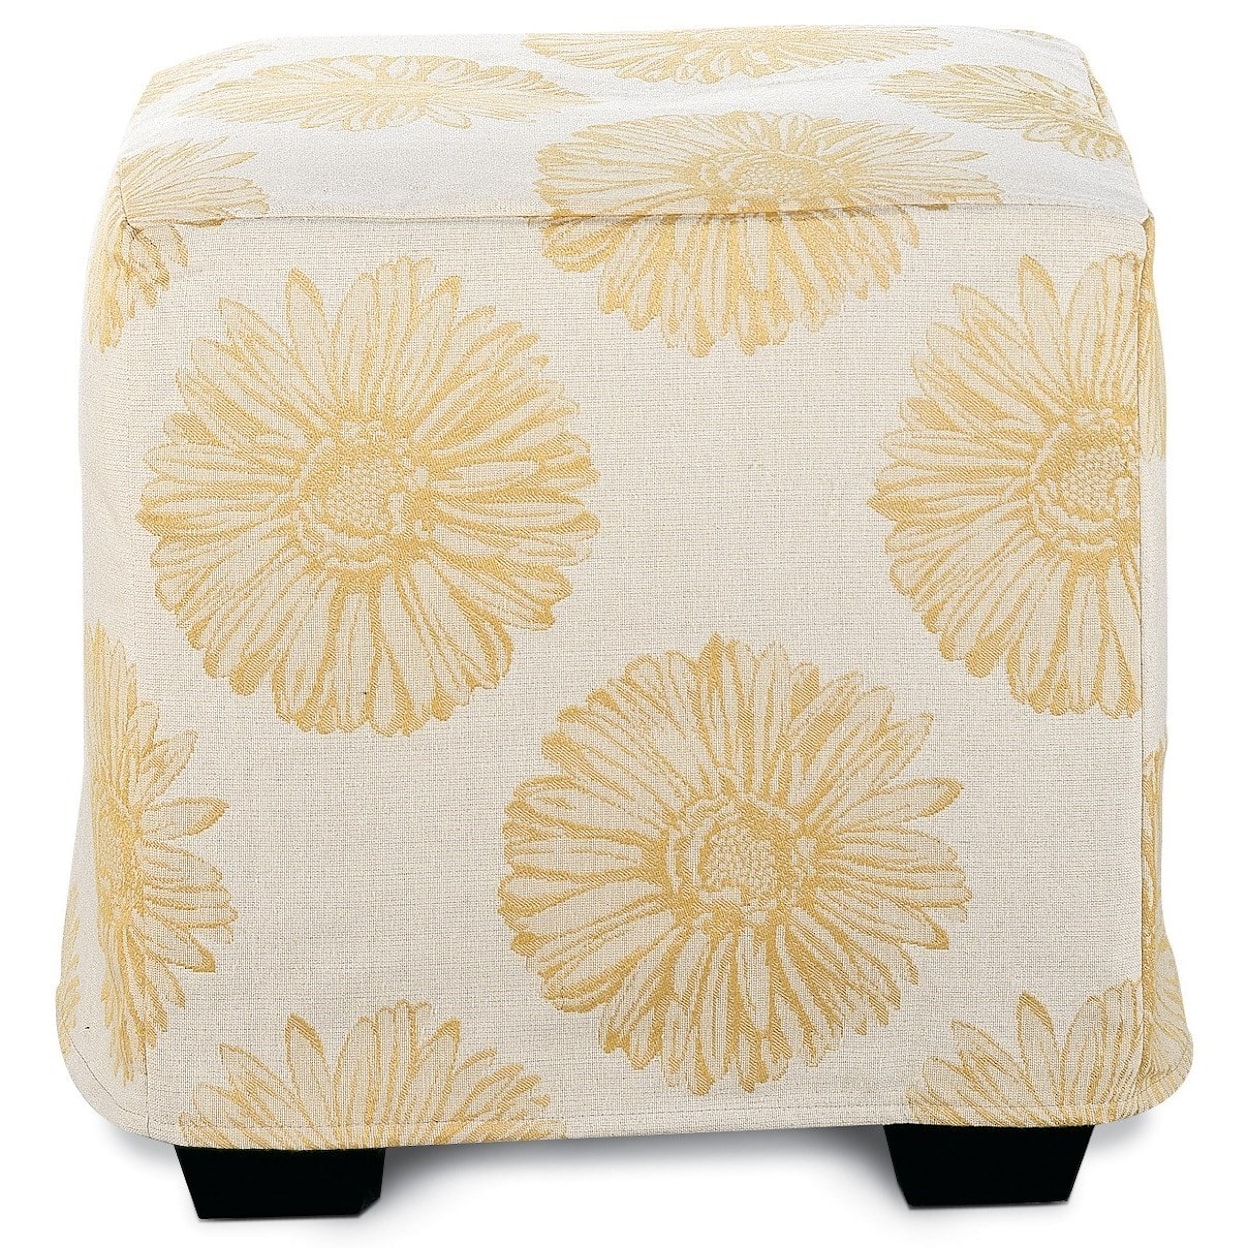 Rowe Chairs and Accents Le Parc Slipcover Ottoman